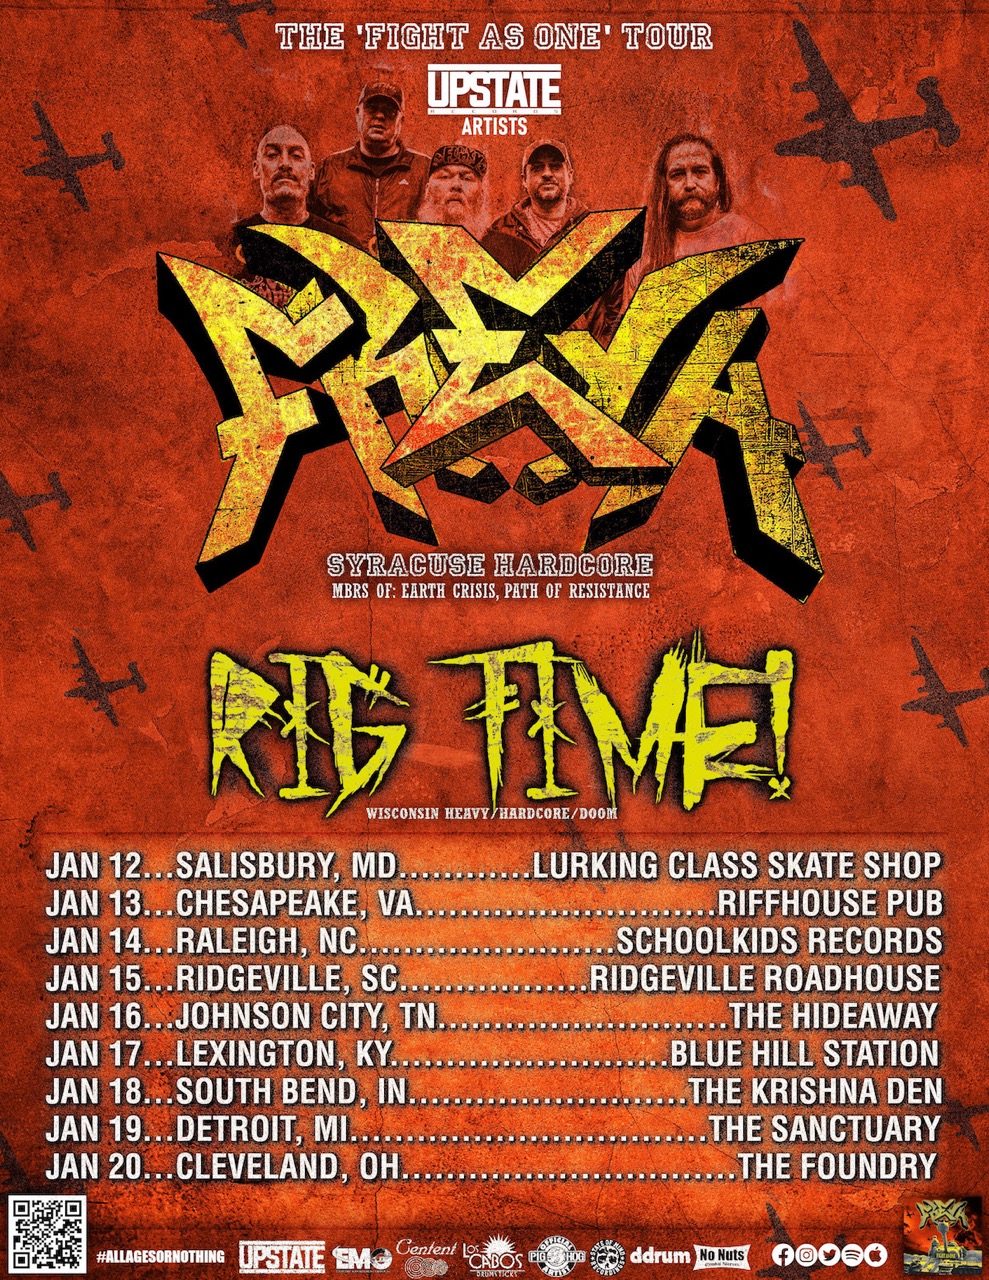 TOUR NEWS: Freya and Rig Time! Announce January 2024 Tour Dates